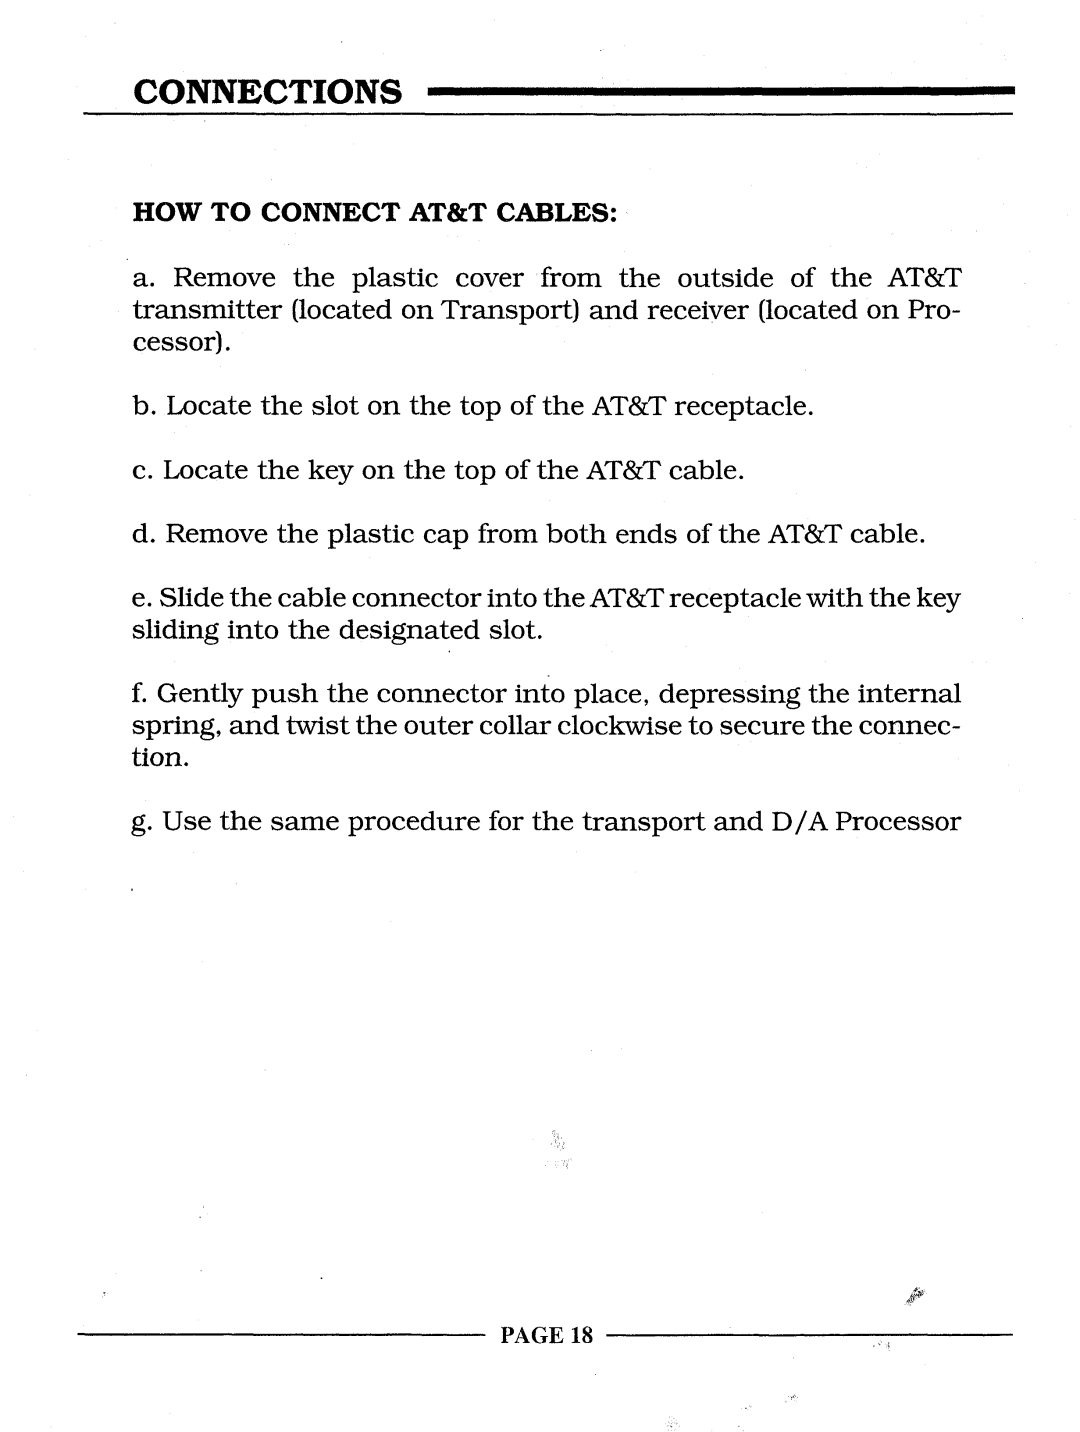 Krell Industries REFERENCE 64 manual How To Connect At&T Cables, Connections 